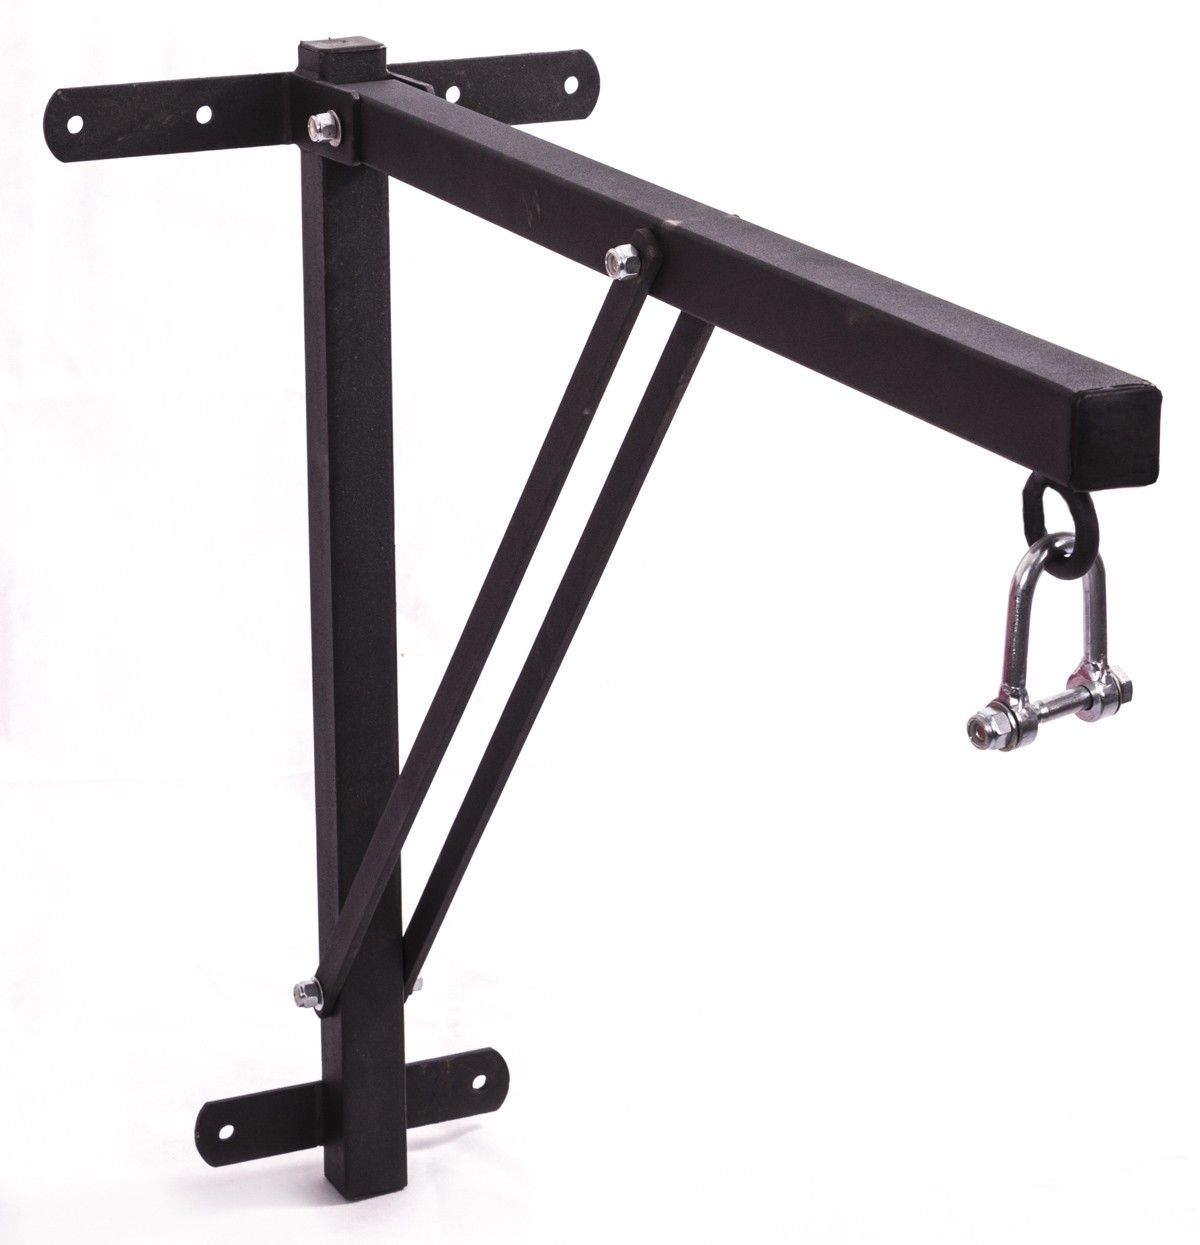 Wall Mount for Punching Bags 60kgs (132lbs)